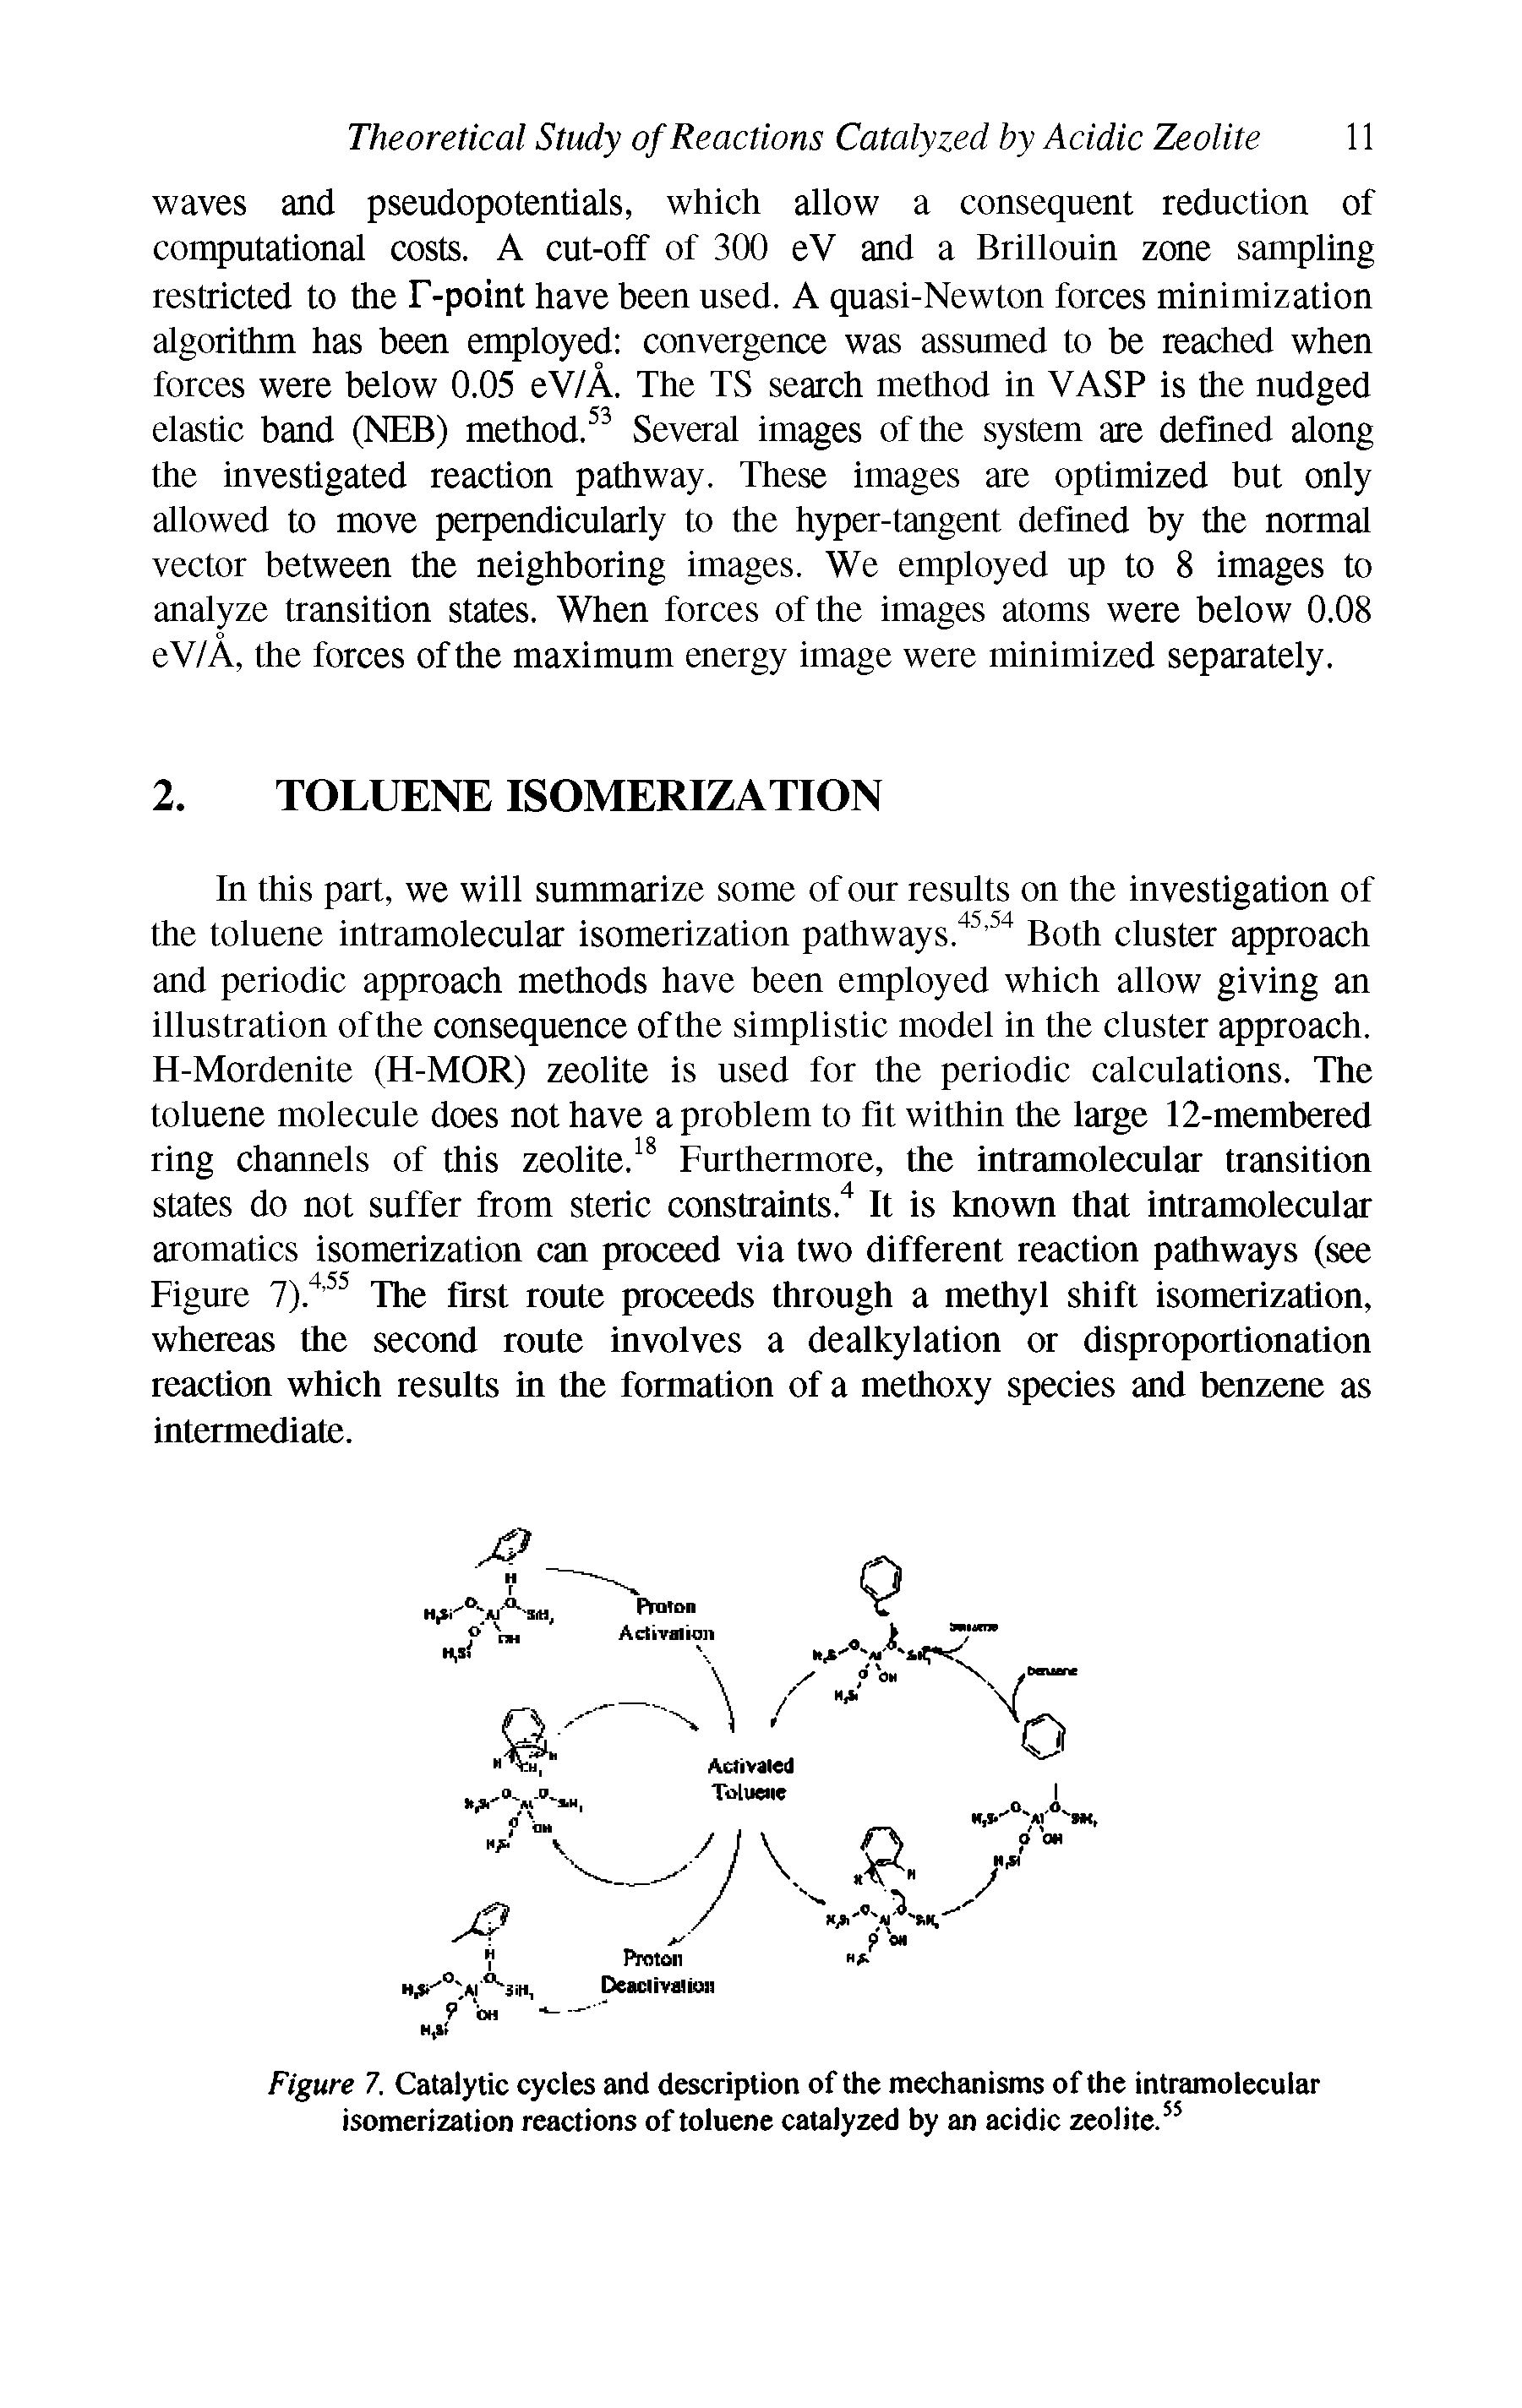 Figure 7. Catalytic cycles and description of the mechanisms of the intramolecular isomerization reactions of toluene catalyzed by an acidic zeolite.